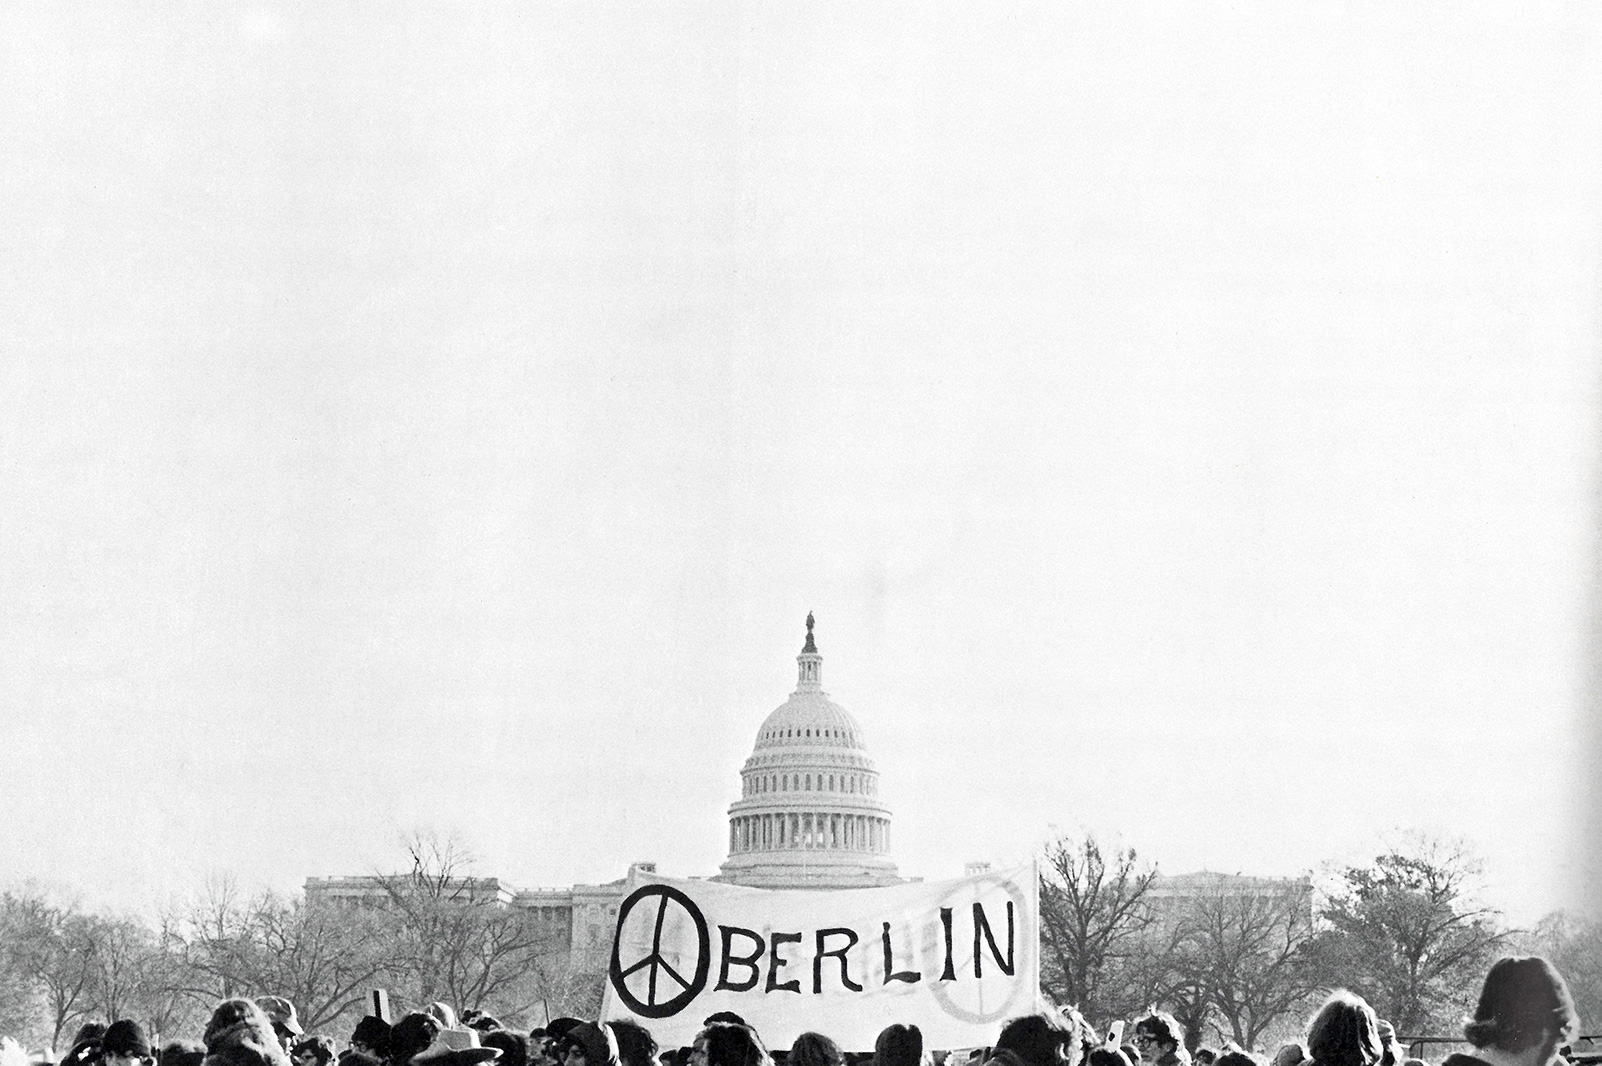 A crowd gathers by the U.S. Capitol, holding a banner that says 'Oberlin' with the letter O containing the peace symbol. Black and white archival photo.